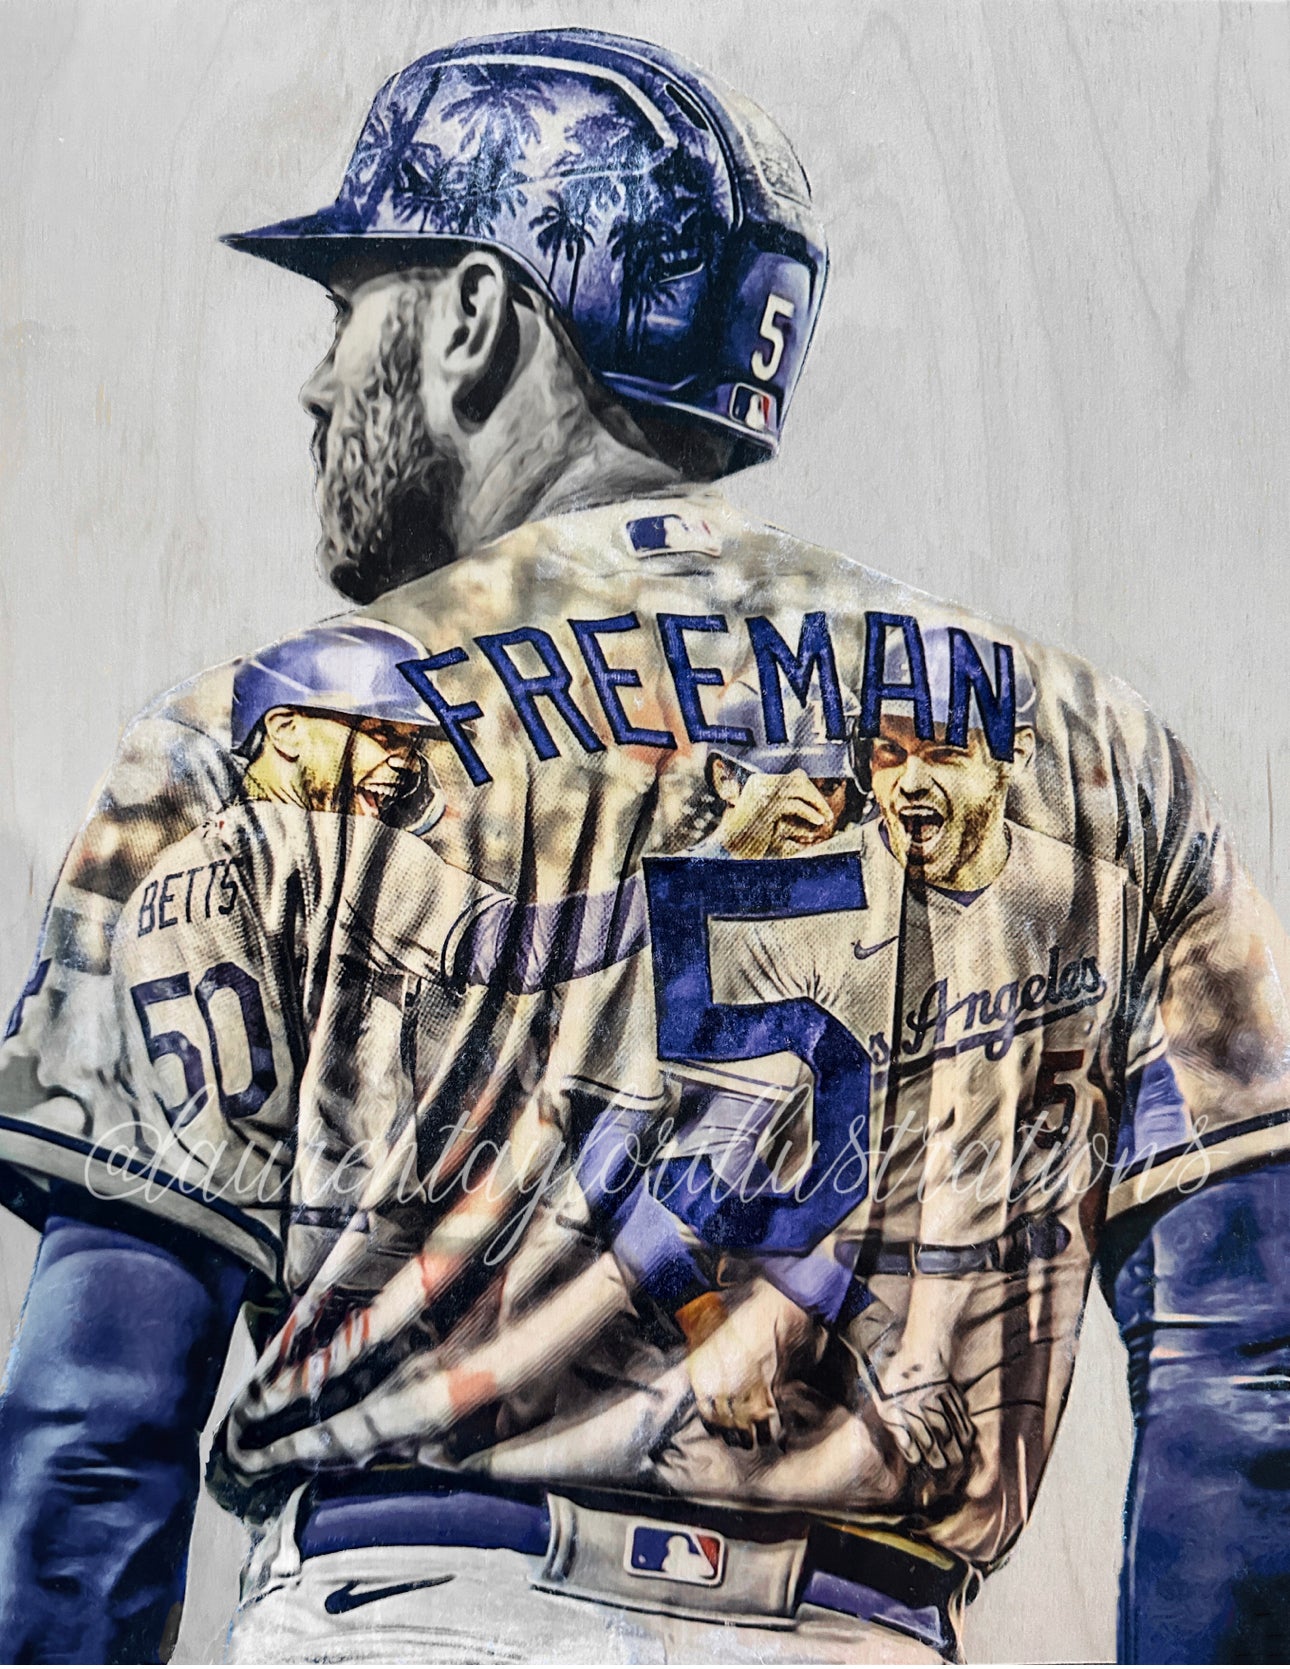 Los Angeles Dodgers: Freddie Freeman 2022 Poster - Officially Licensed –  Fathead